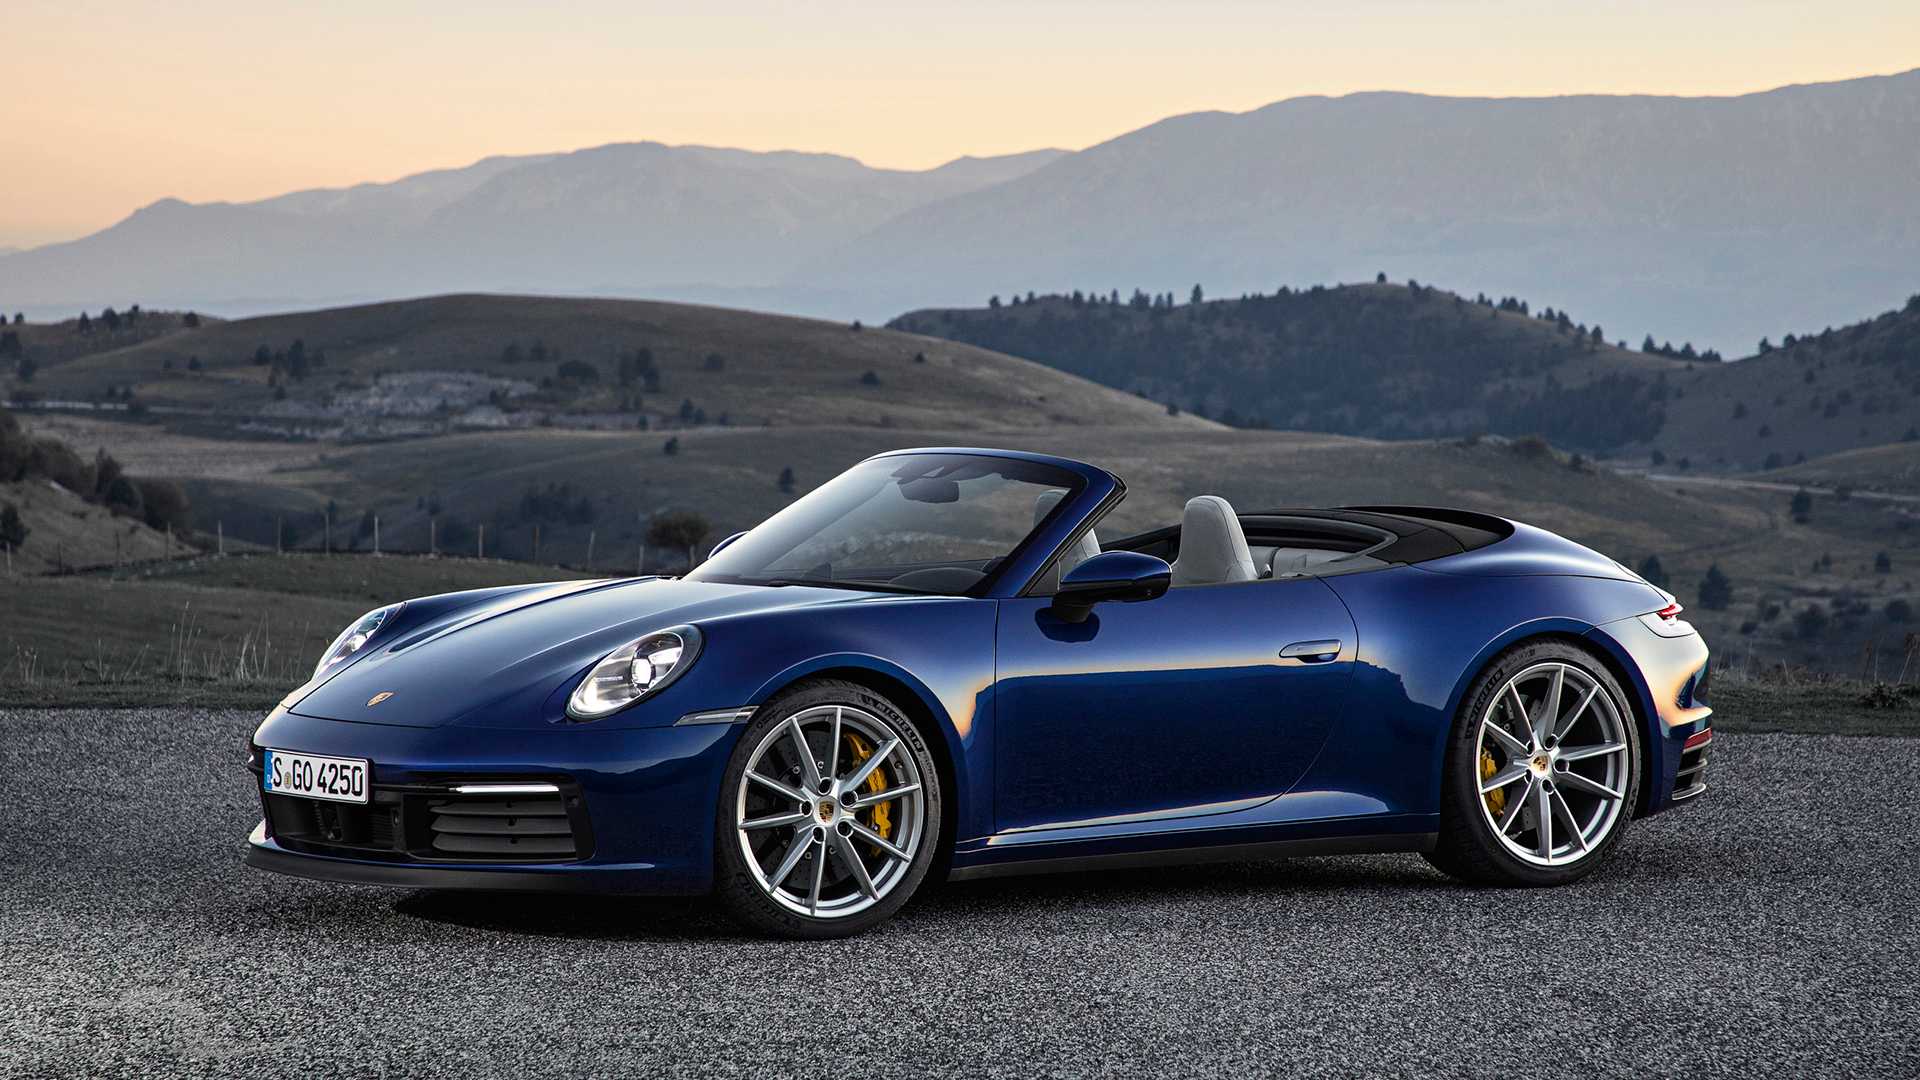 porsche-911-carrera-s-cabriolet-ghe-ngoi-dat-chuan-chat-luong-cao